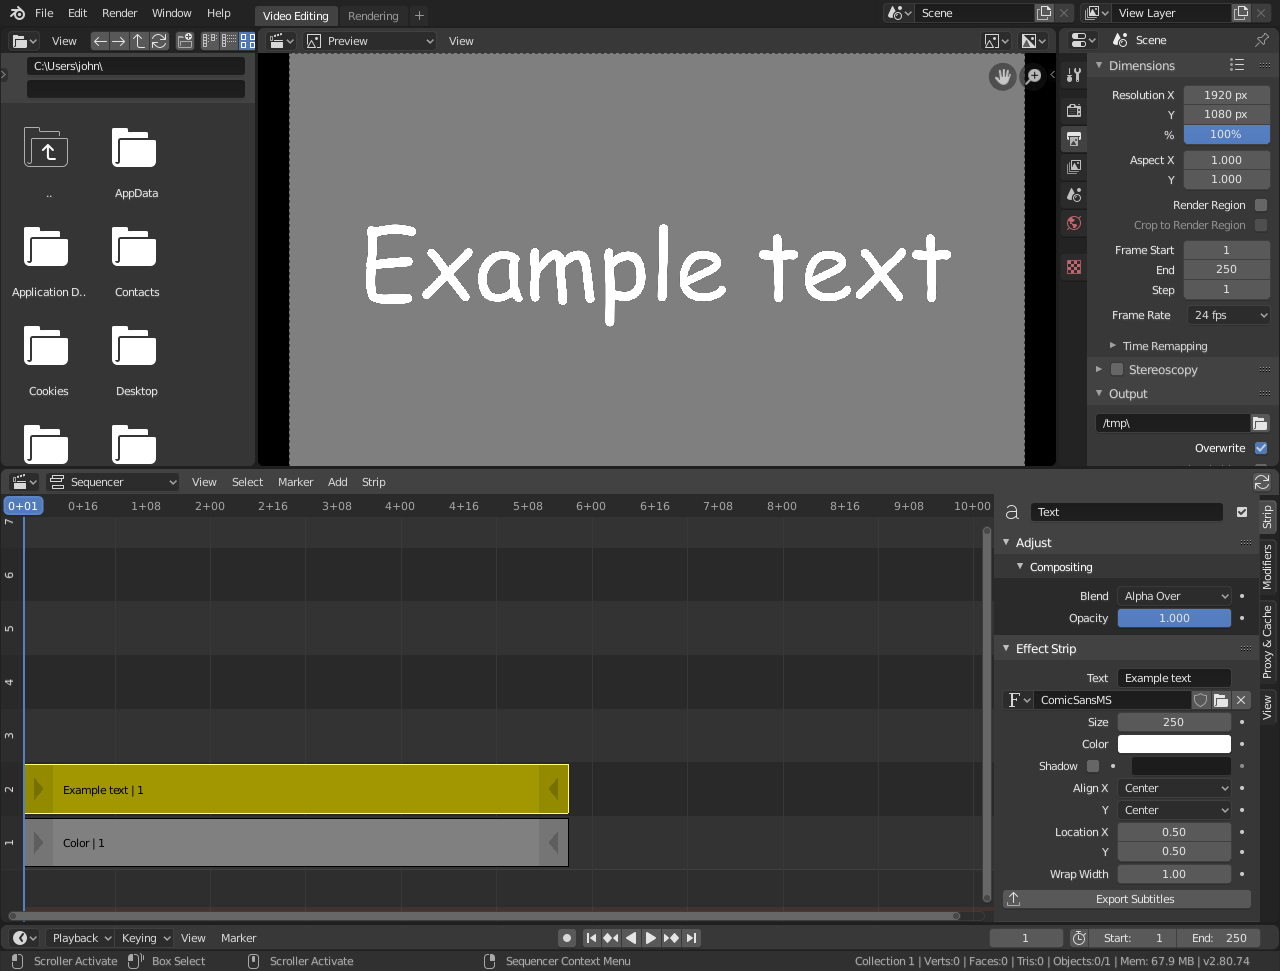 https://projects.blender.org/blender/blender-manual/media/branch/main/manual/images/video-editing_sequencer_strips_text_example.png